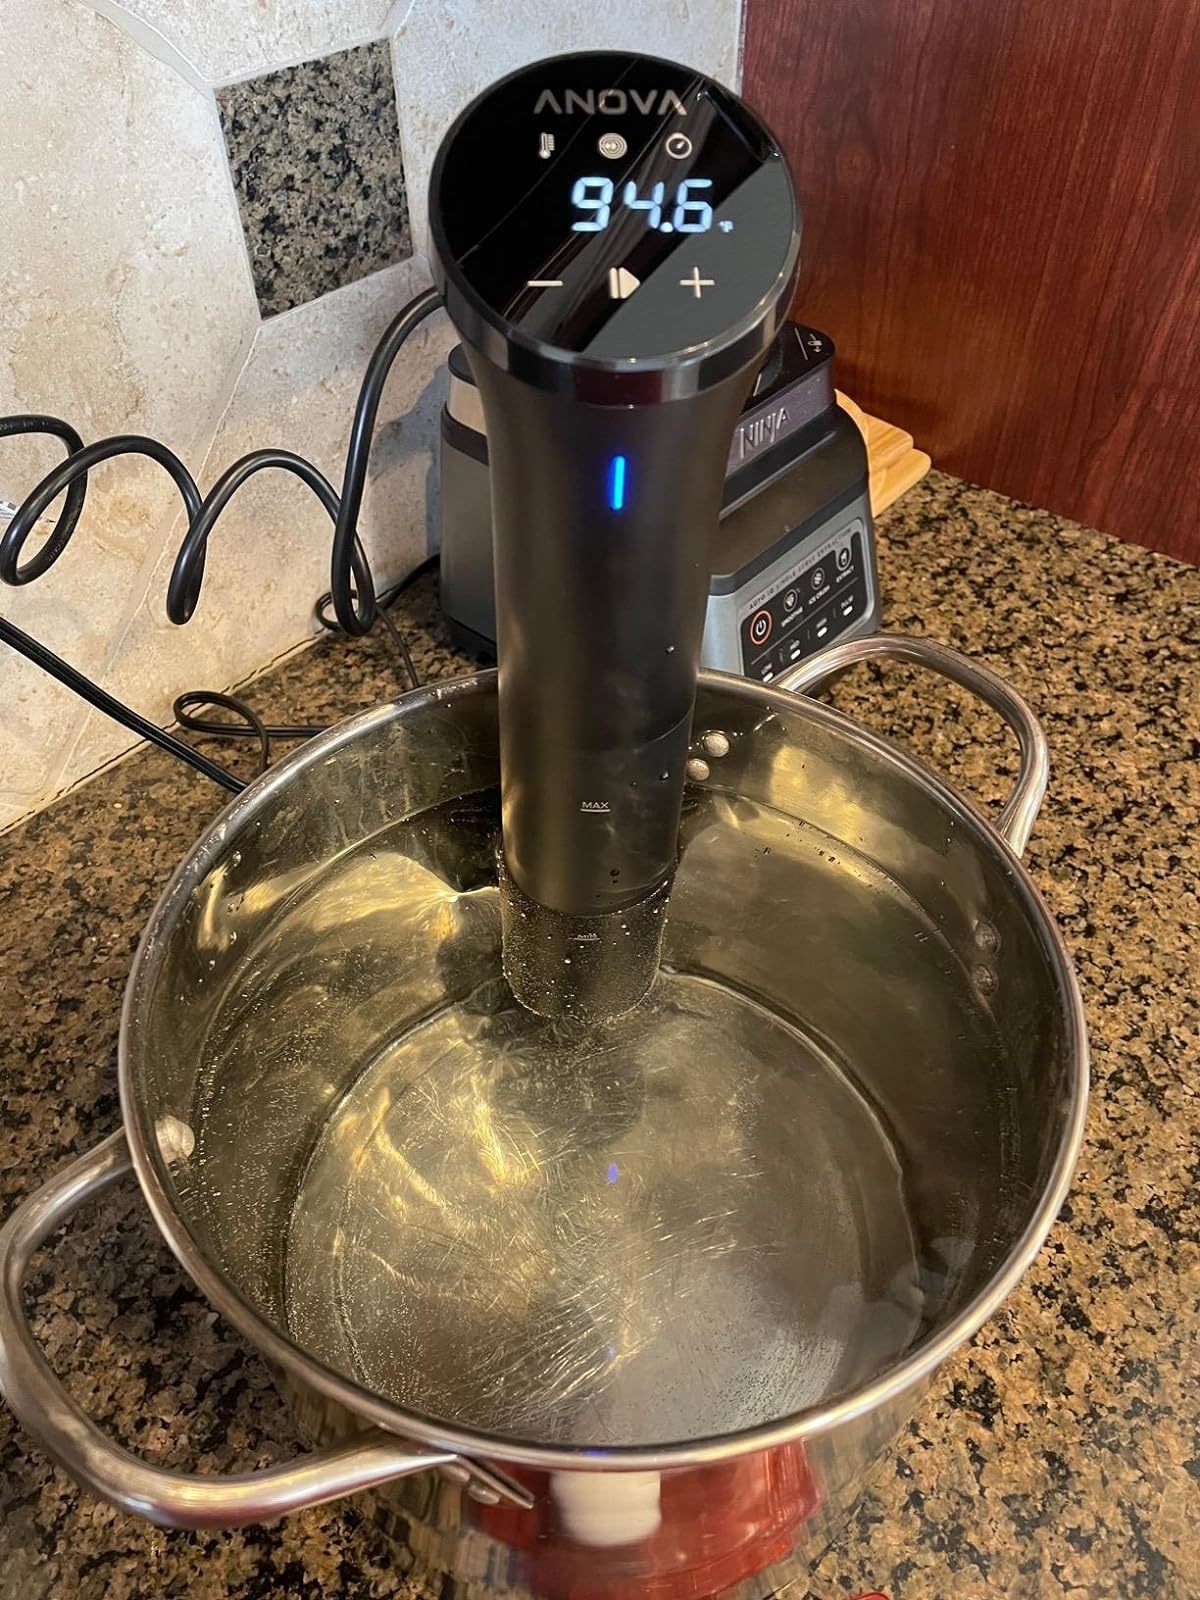 the sous vide in a pan that displays the temperature 94.6